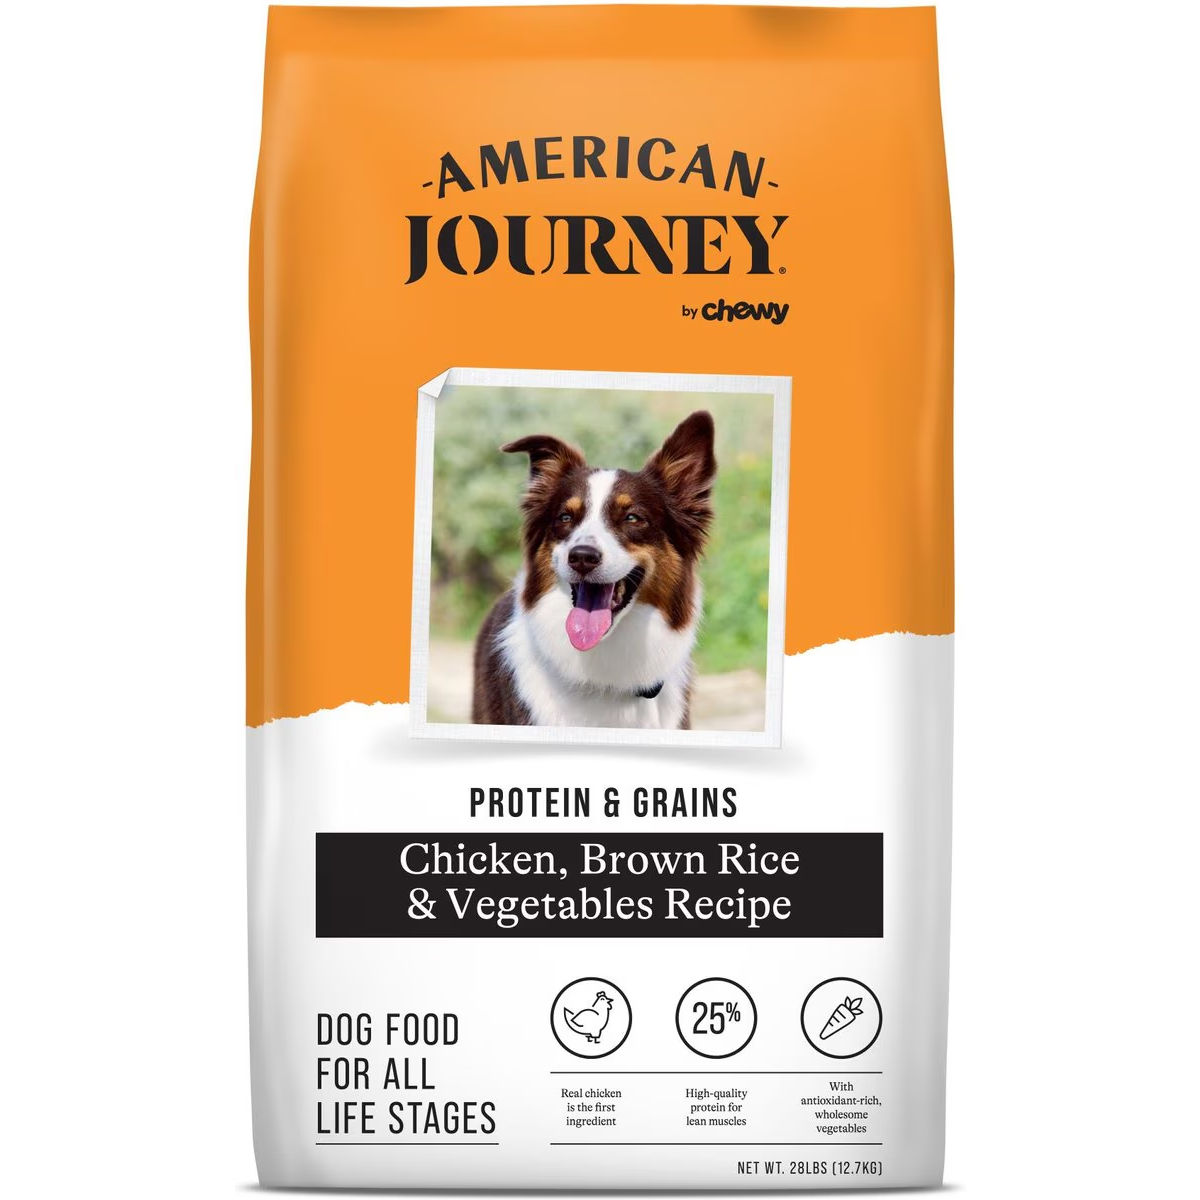 American Journey Protein & Grains Chicken, Brown Rice & Vegetables Recipe Dry Dog Food